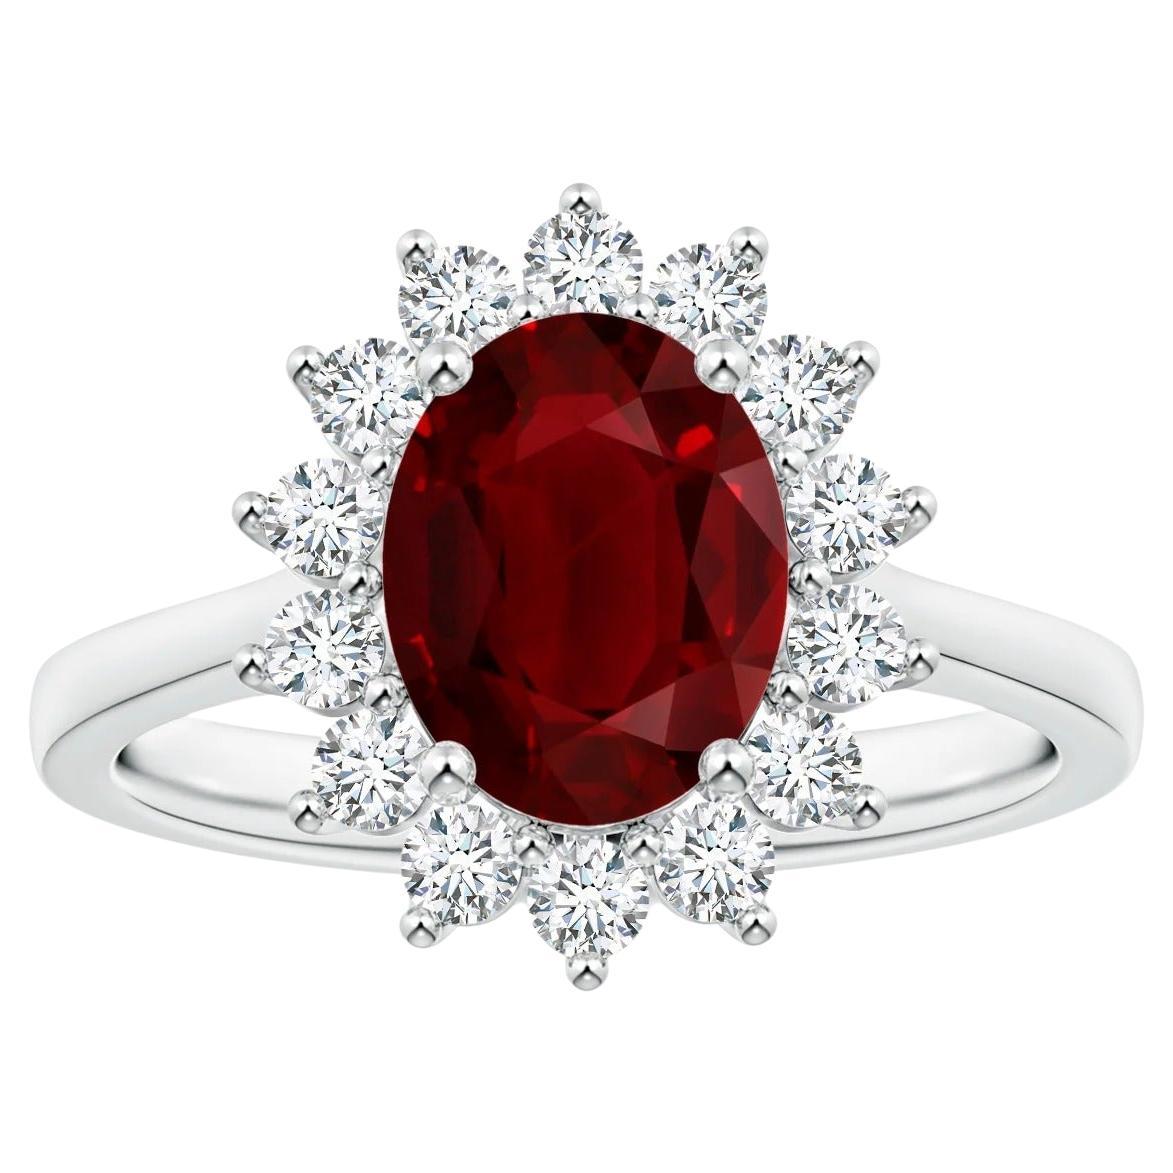 For Sale:  Angara GIA Certified Ruby Princess Diana Inspired Halo Ring in White Gold